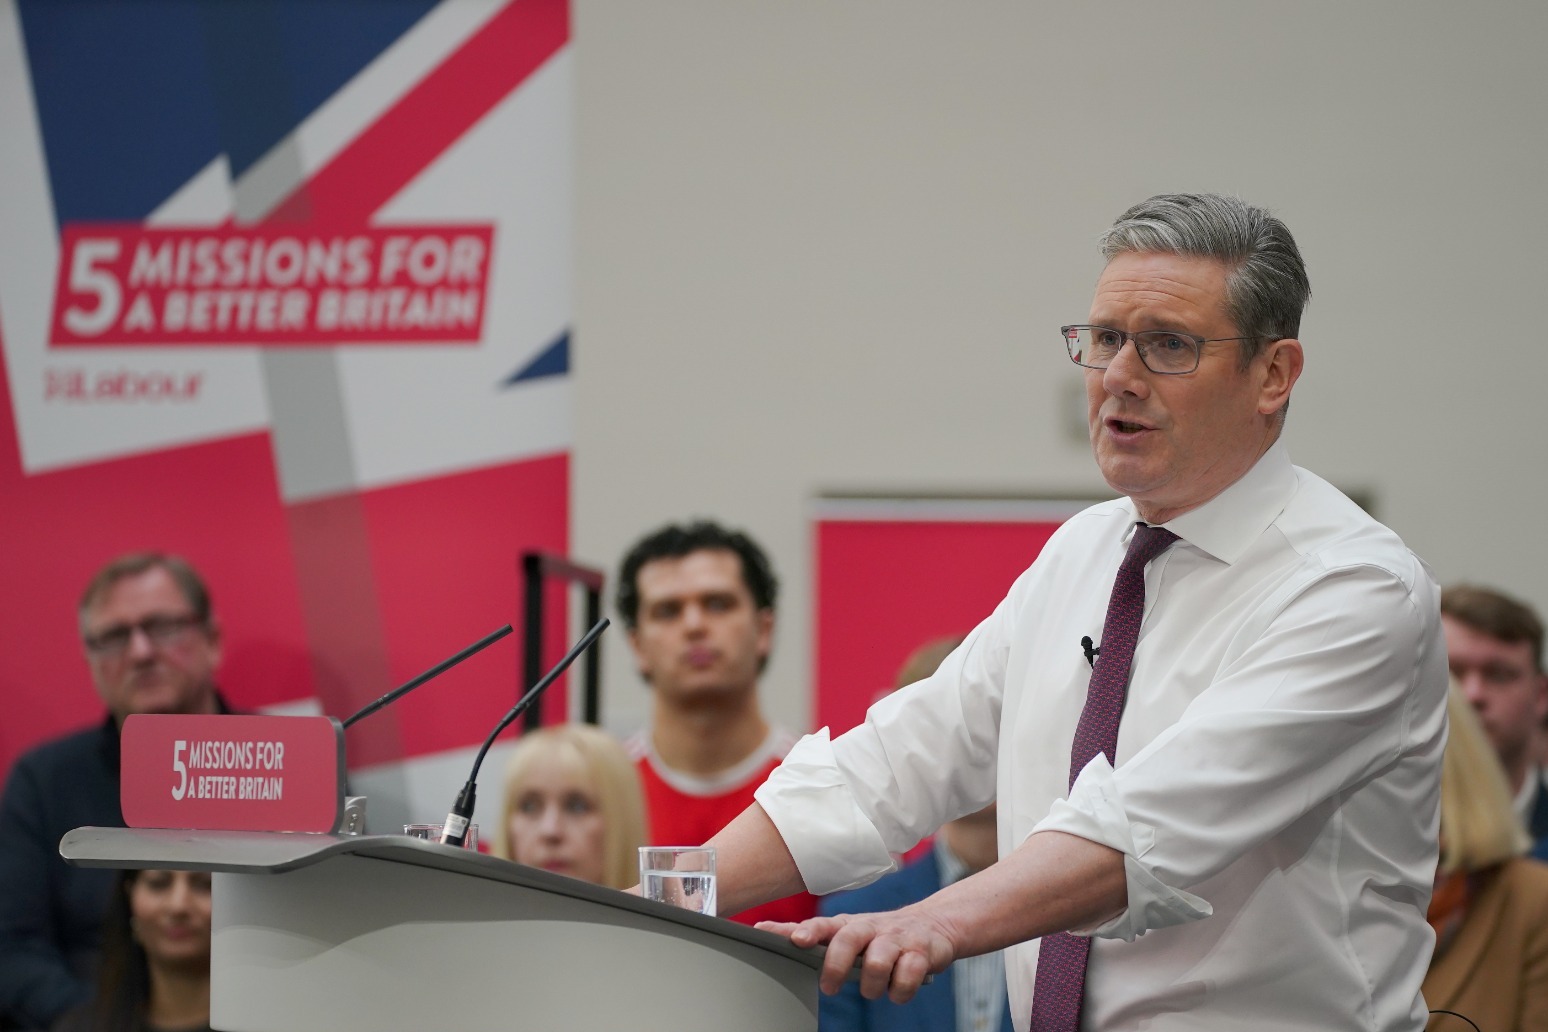 Labour leader promises to ruffle feathers with new ‘missions’ for Britain 